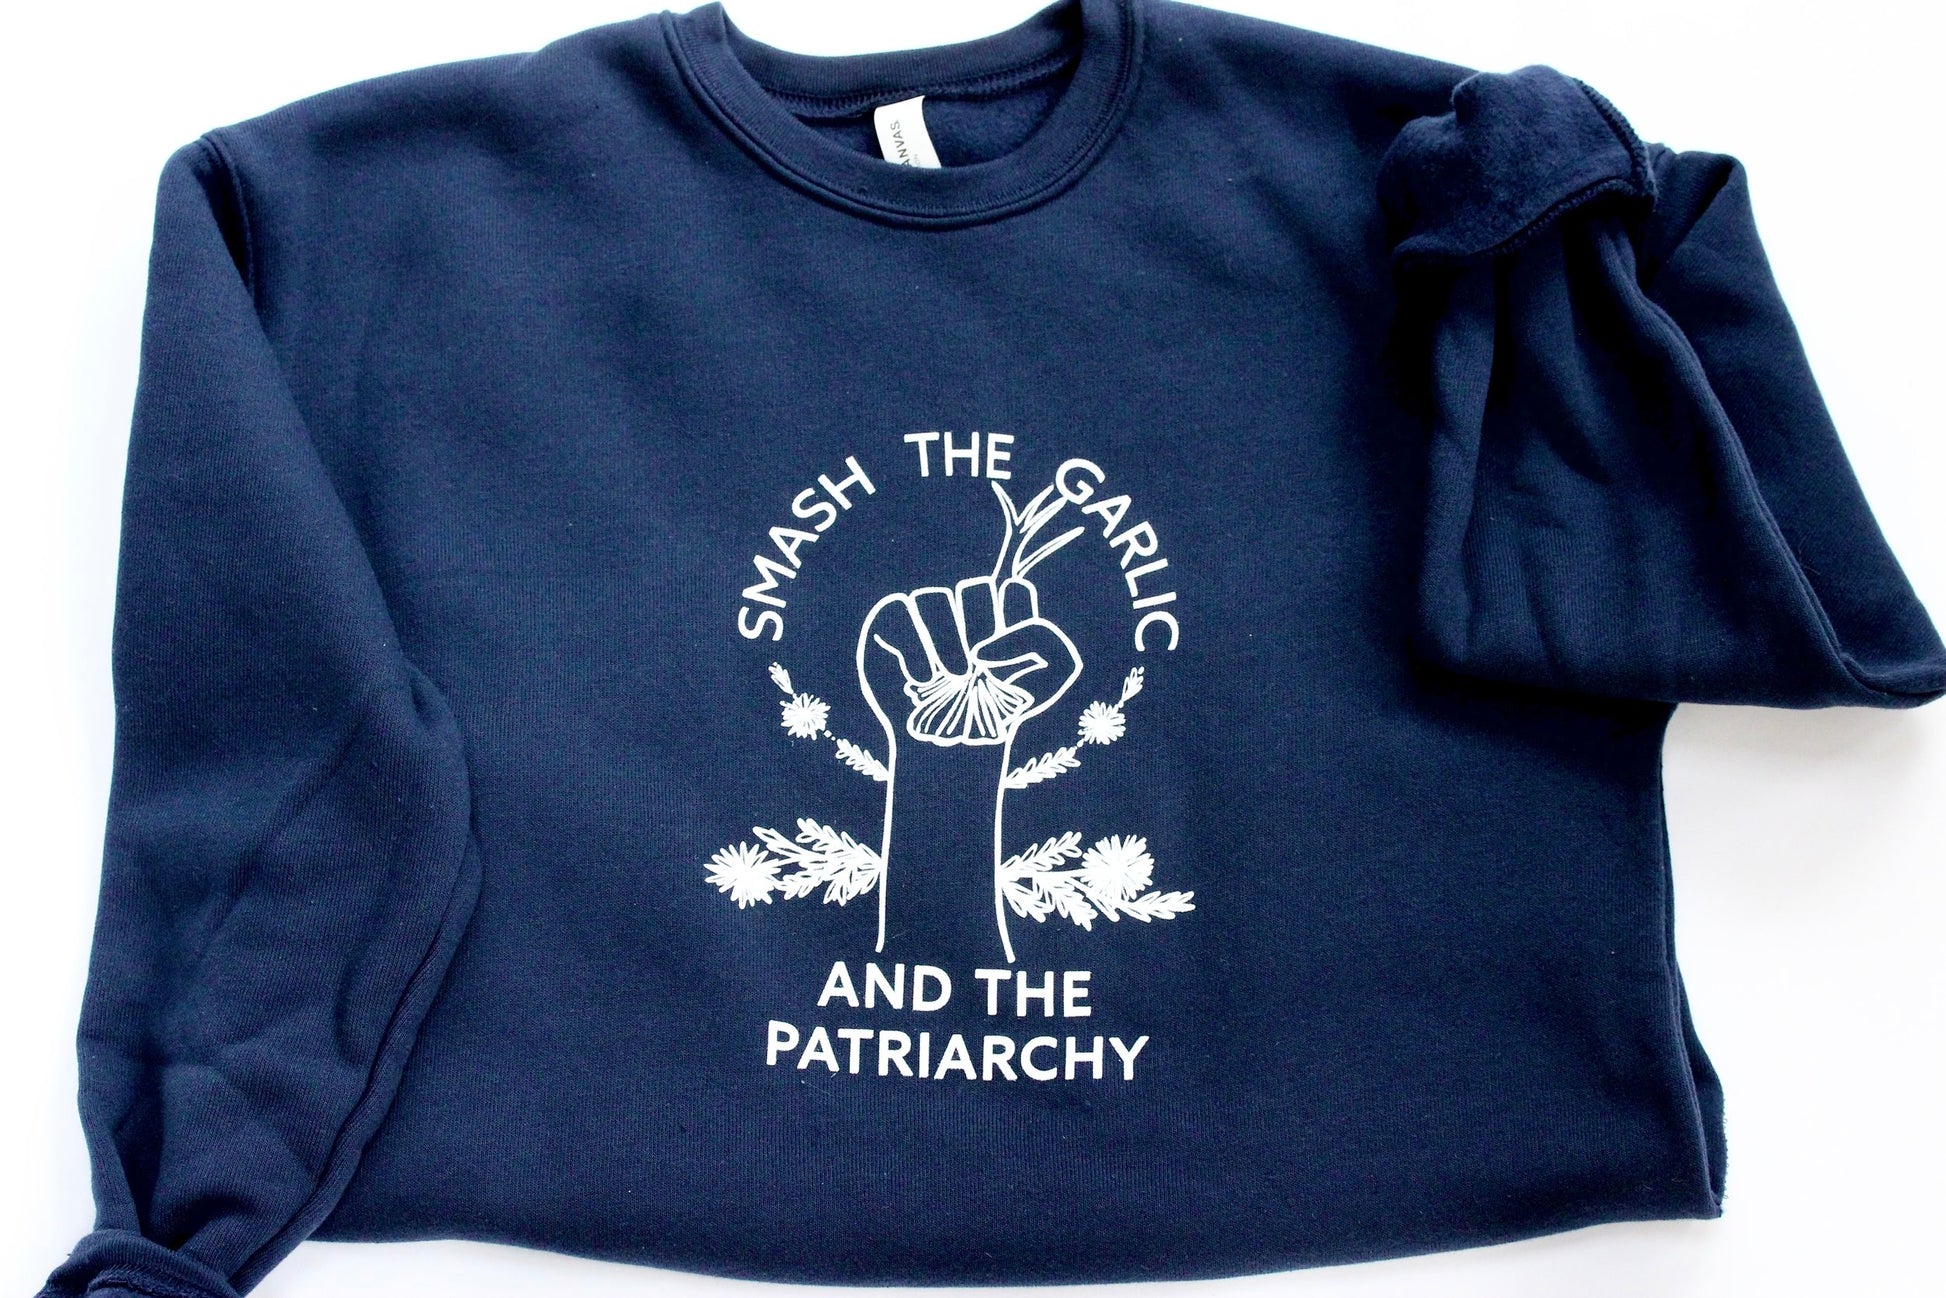 A navy blue crewneck with the words "Smash the Garlic and the Patriarchy" and an illustration of a hand holding garlic